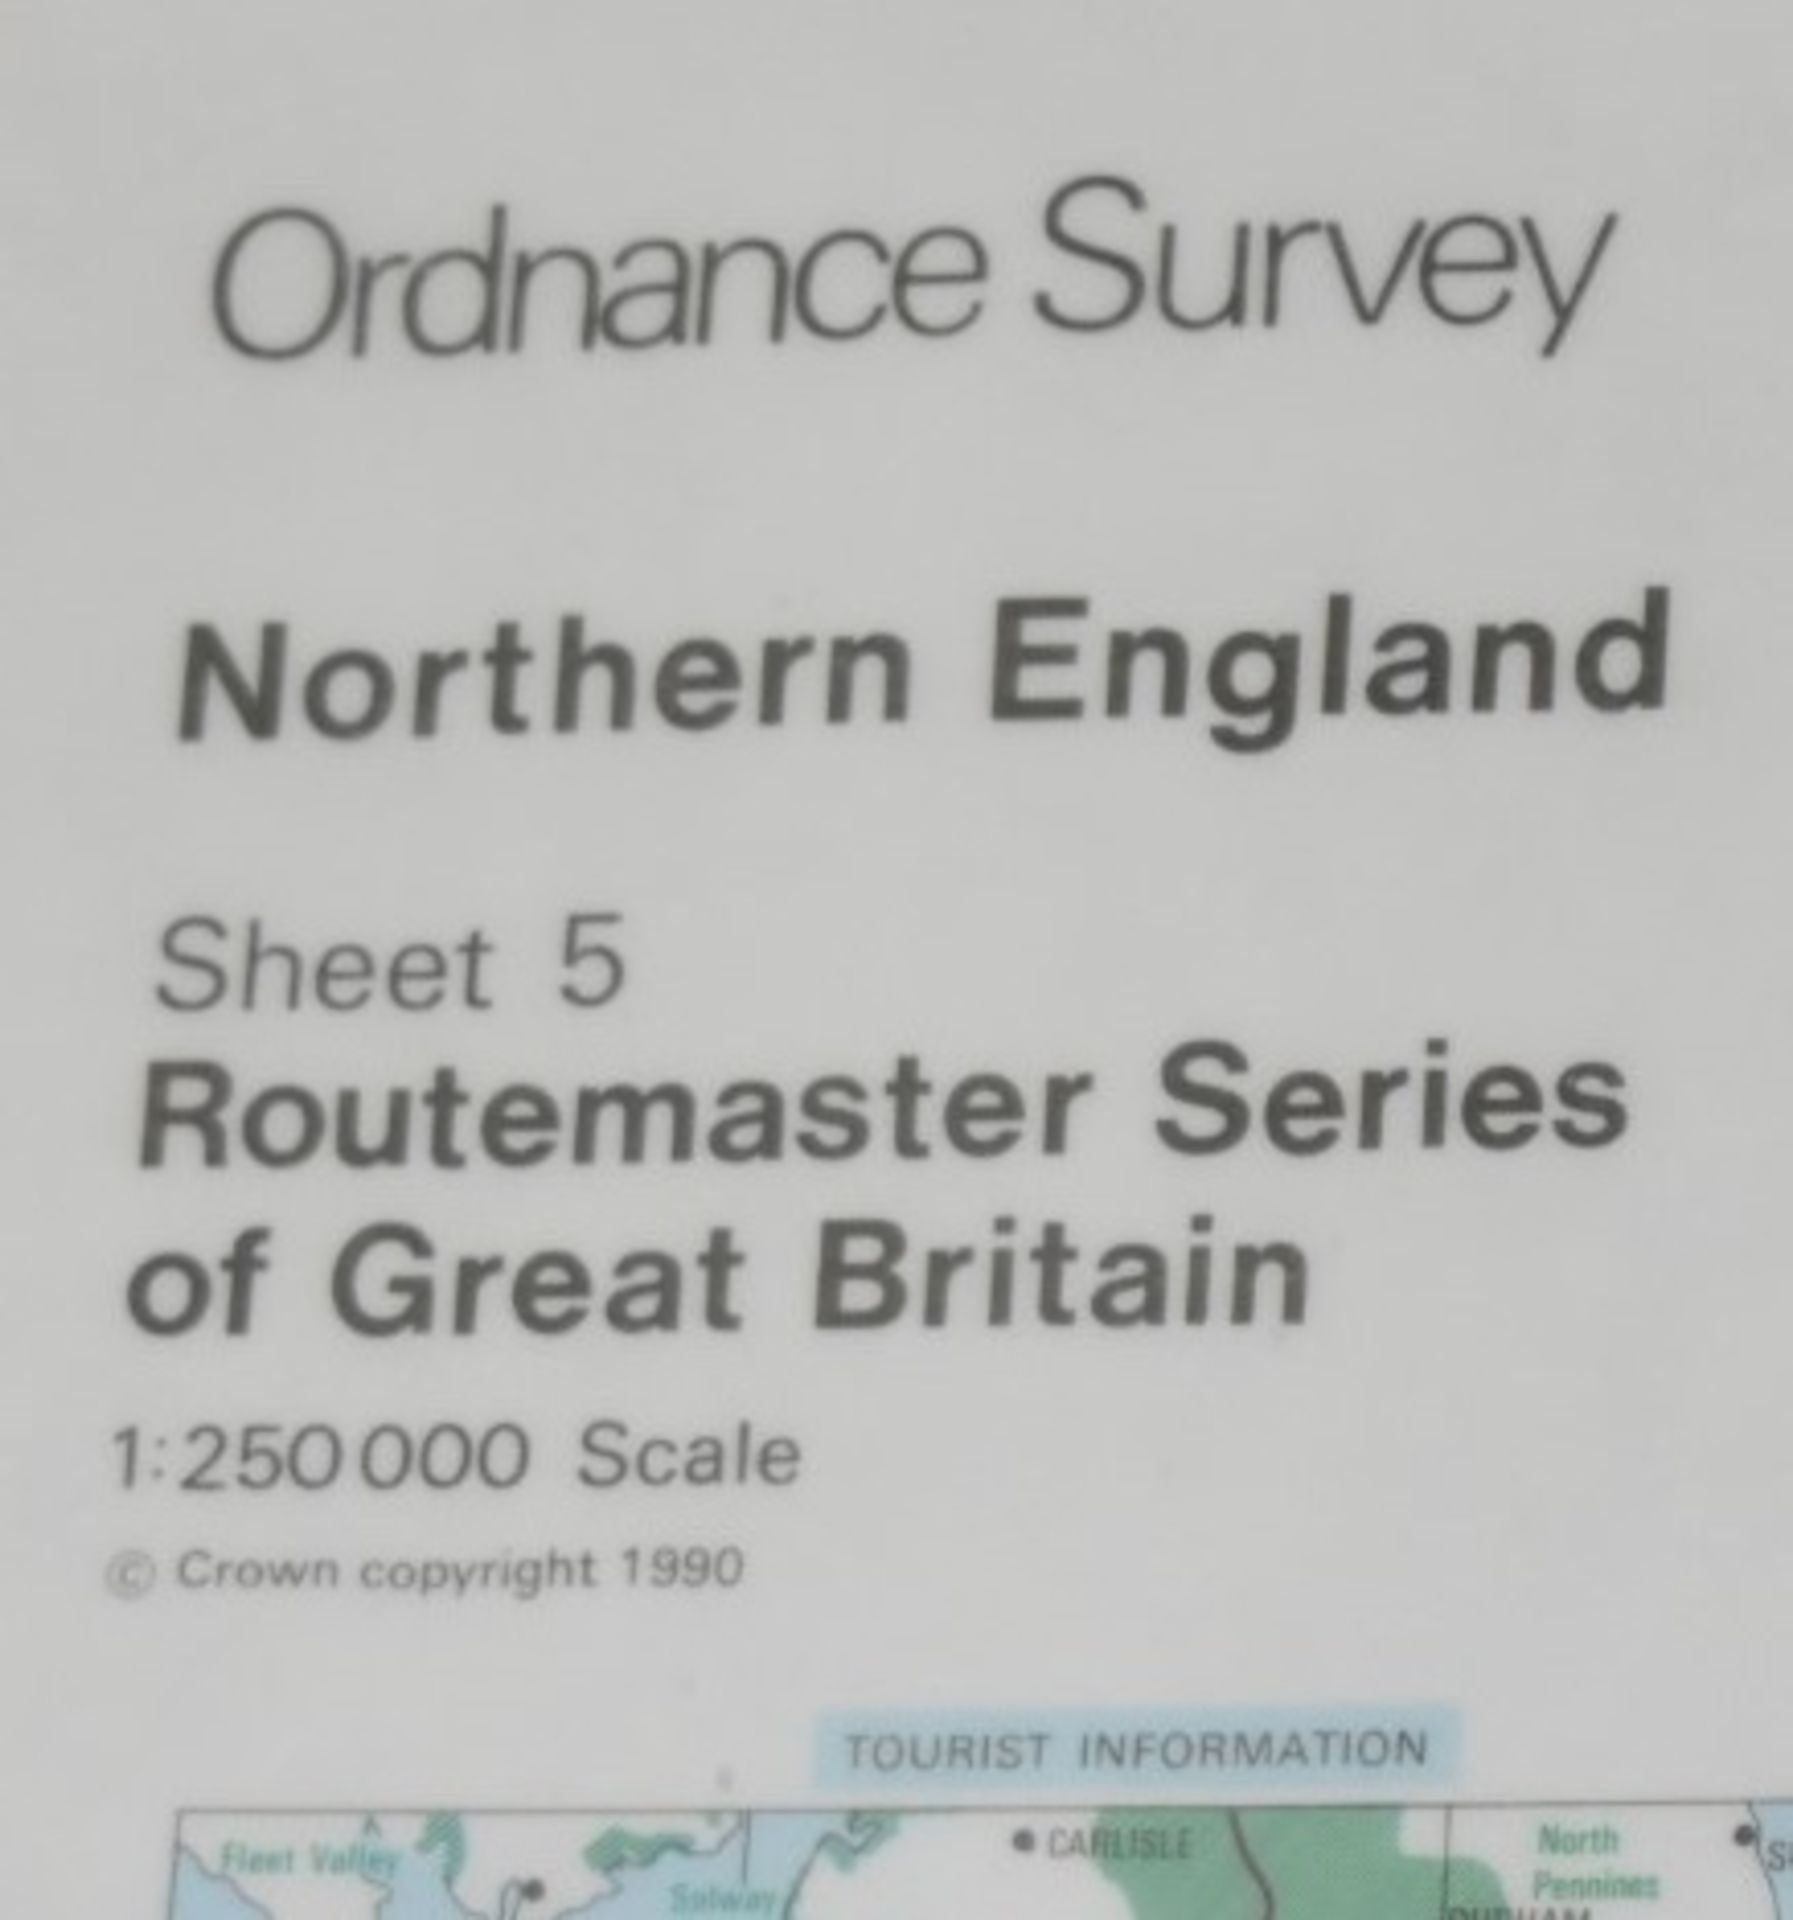 1 x Large Frame Map of Northern England - Ordnance Survey Routemaster Series 1990 - 130 x 100 - Image 2 of 4